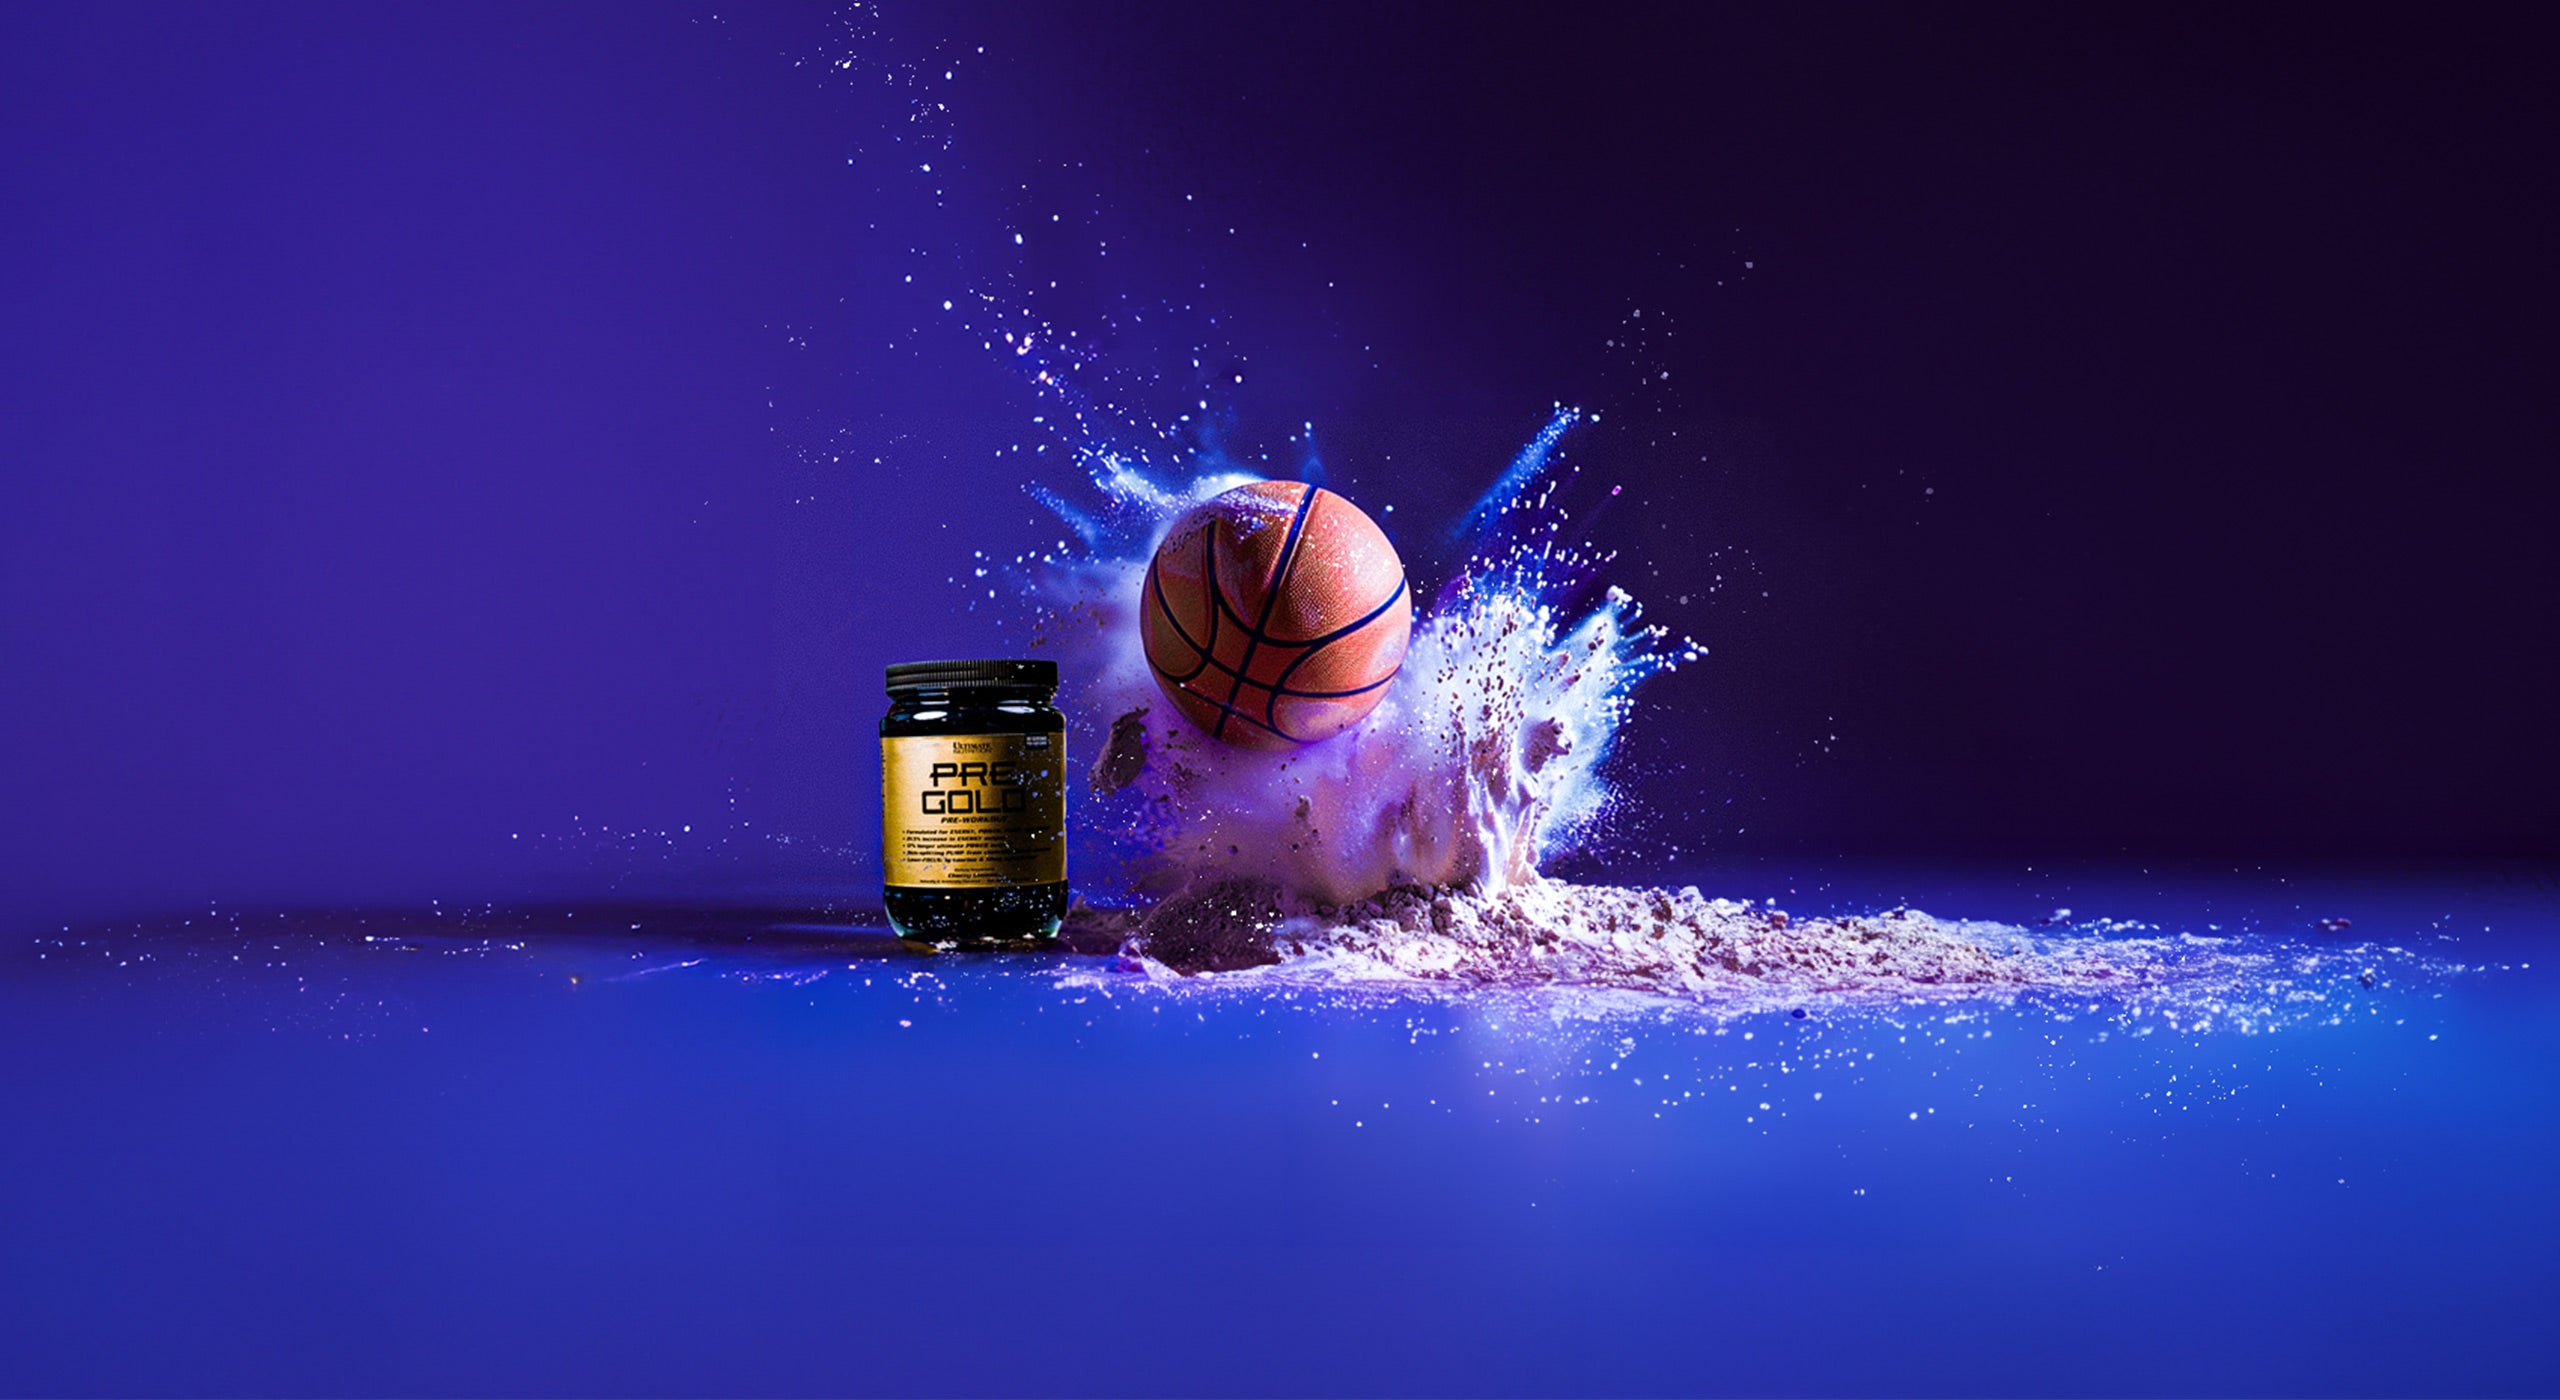 A 'PRE GOLD' supplement jar and a basketball with a dynamic white protein powder splash against a purple background, suggesting energy and performance